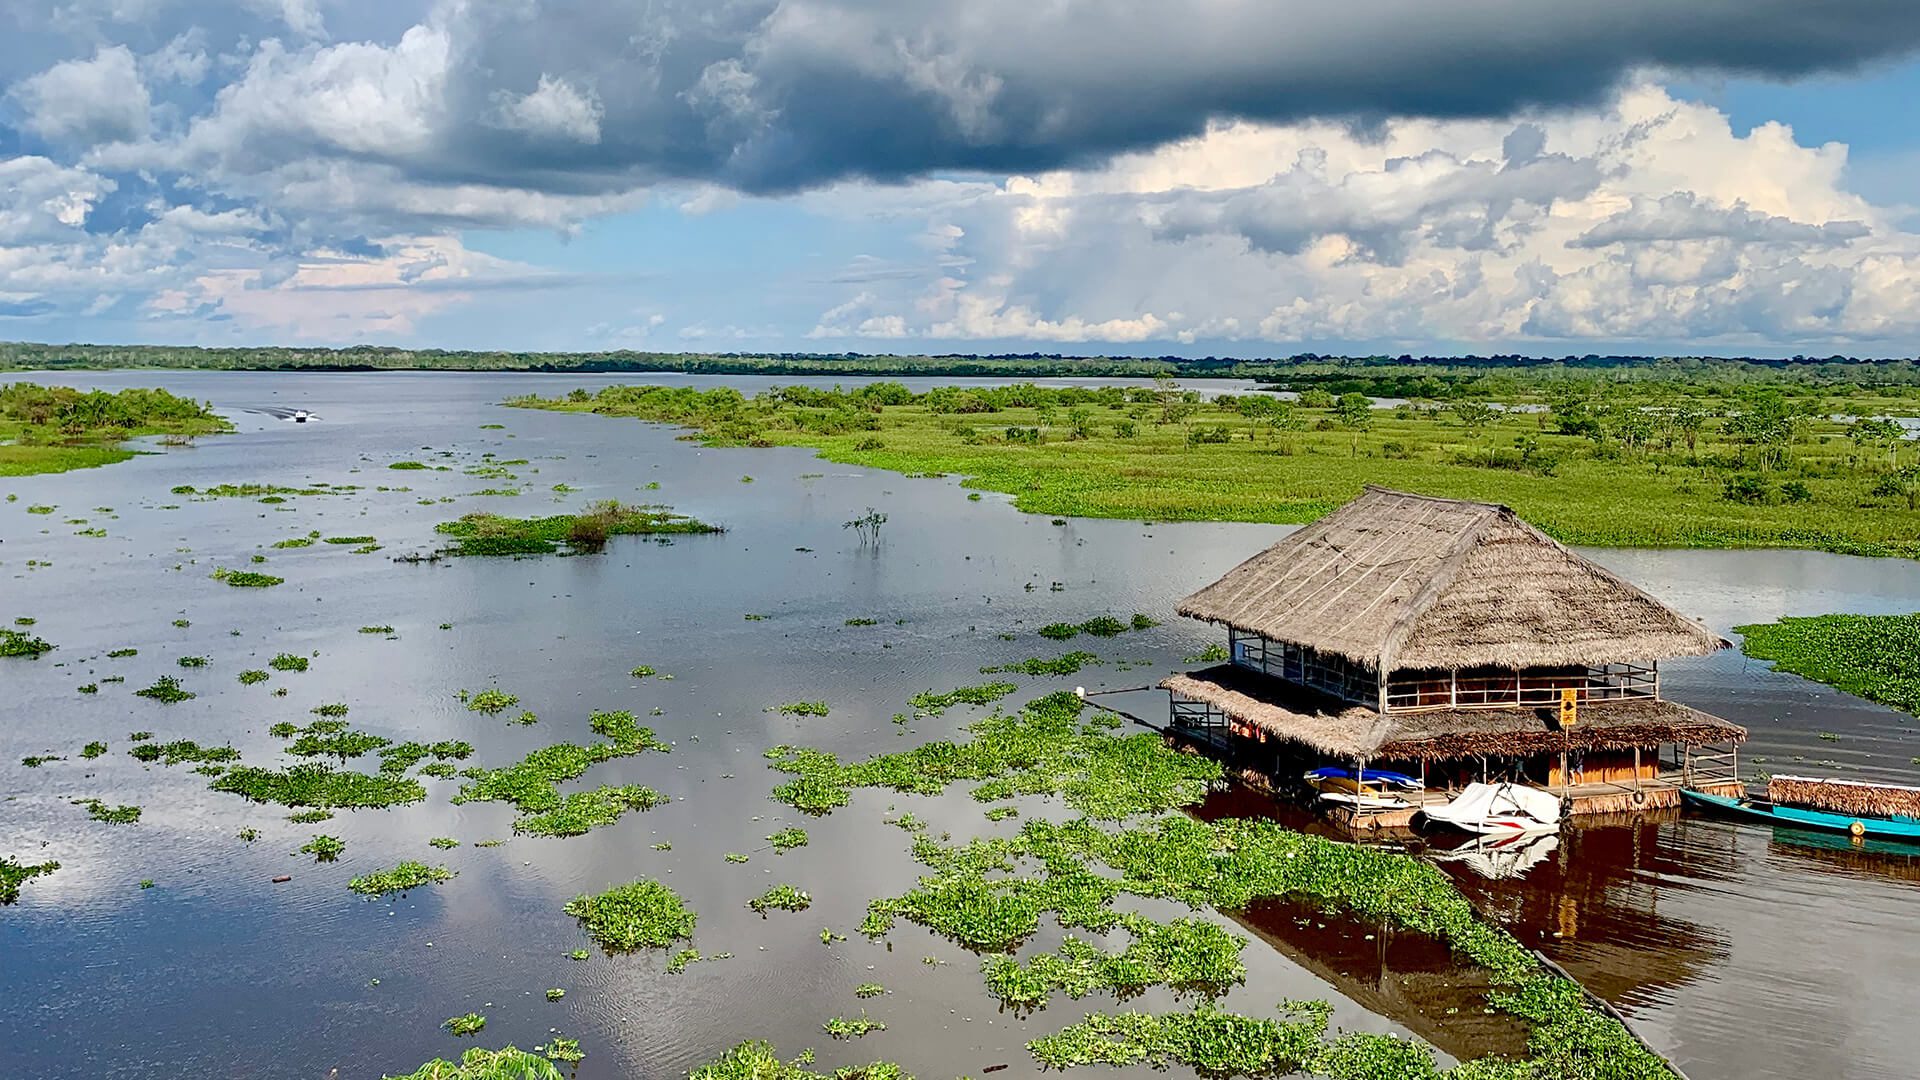 Iquitos landscape with a stilt house over the river, surrounded by vegetation and powerful clouds